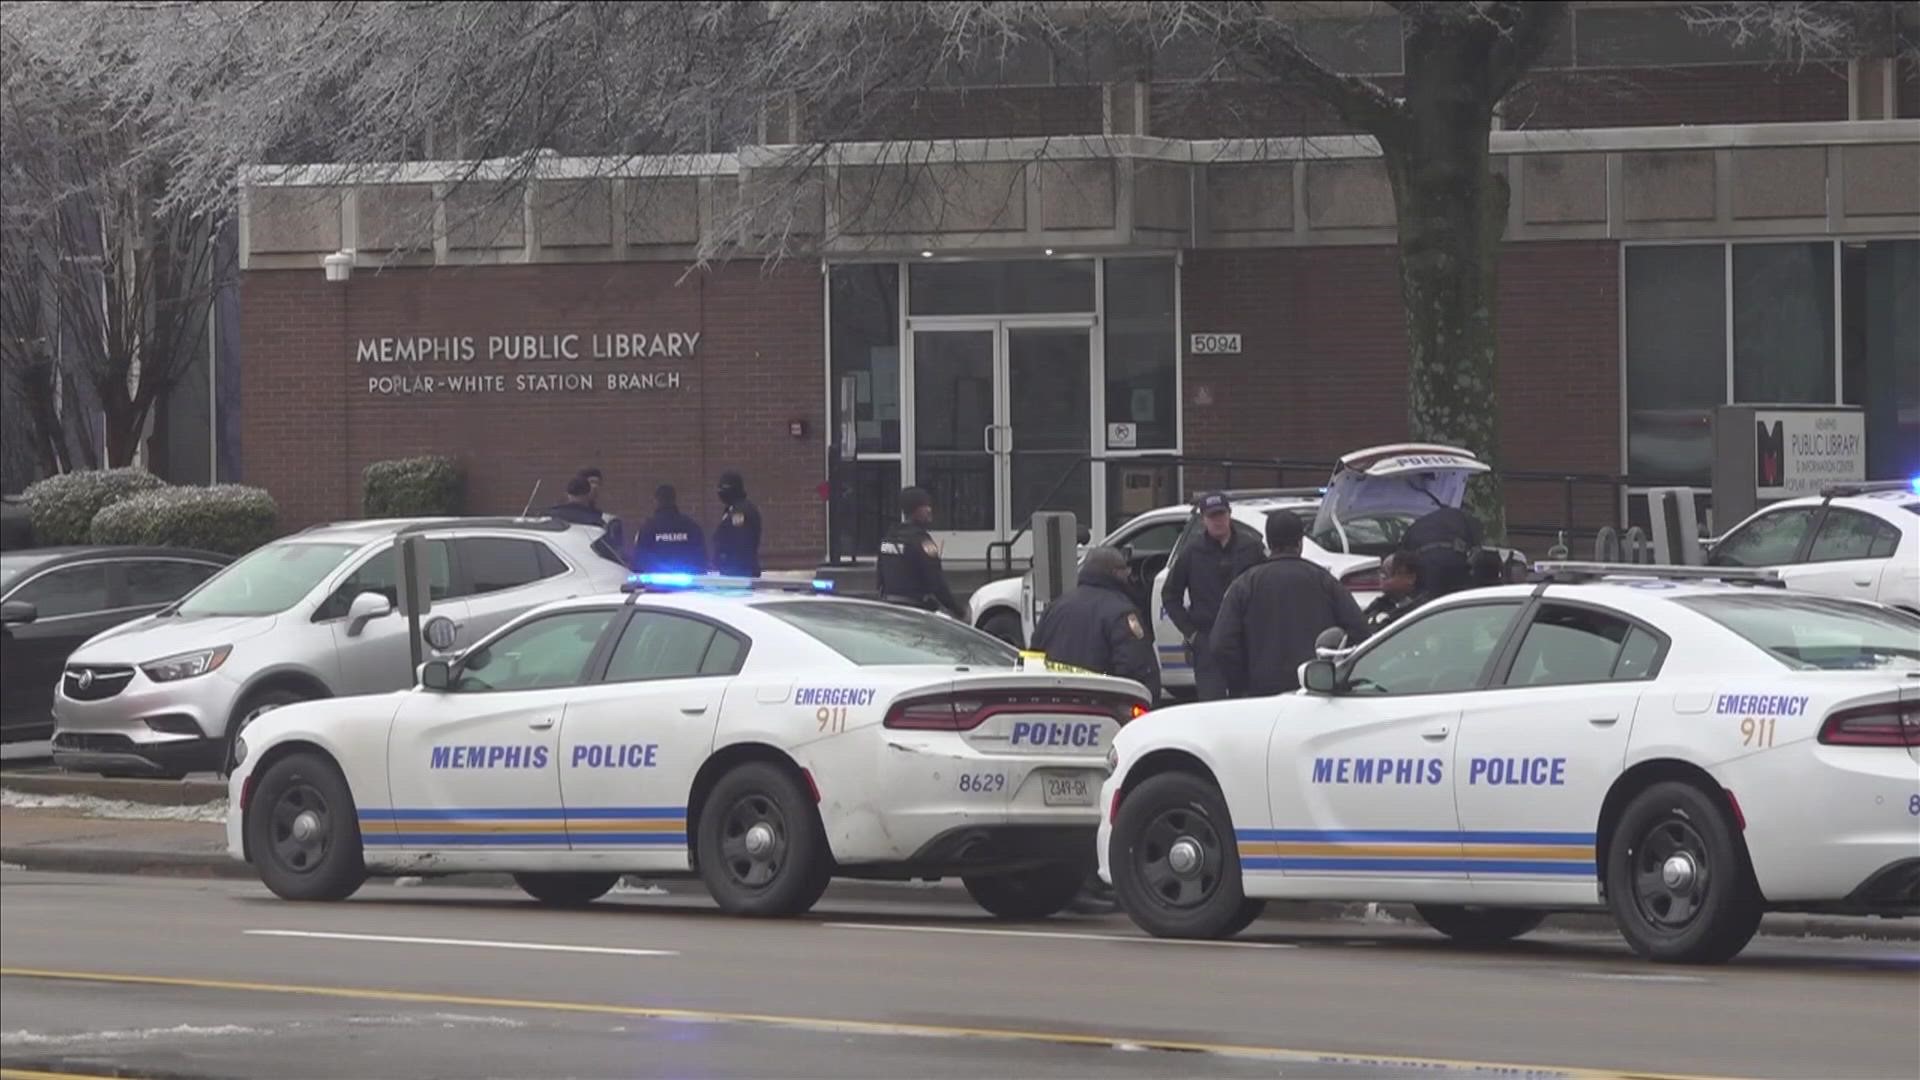 The TBI said a call about a trespasser came from a nearby business about 30 minutes before the shooting inside the Poplar-White Station Library.